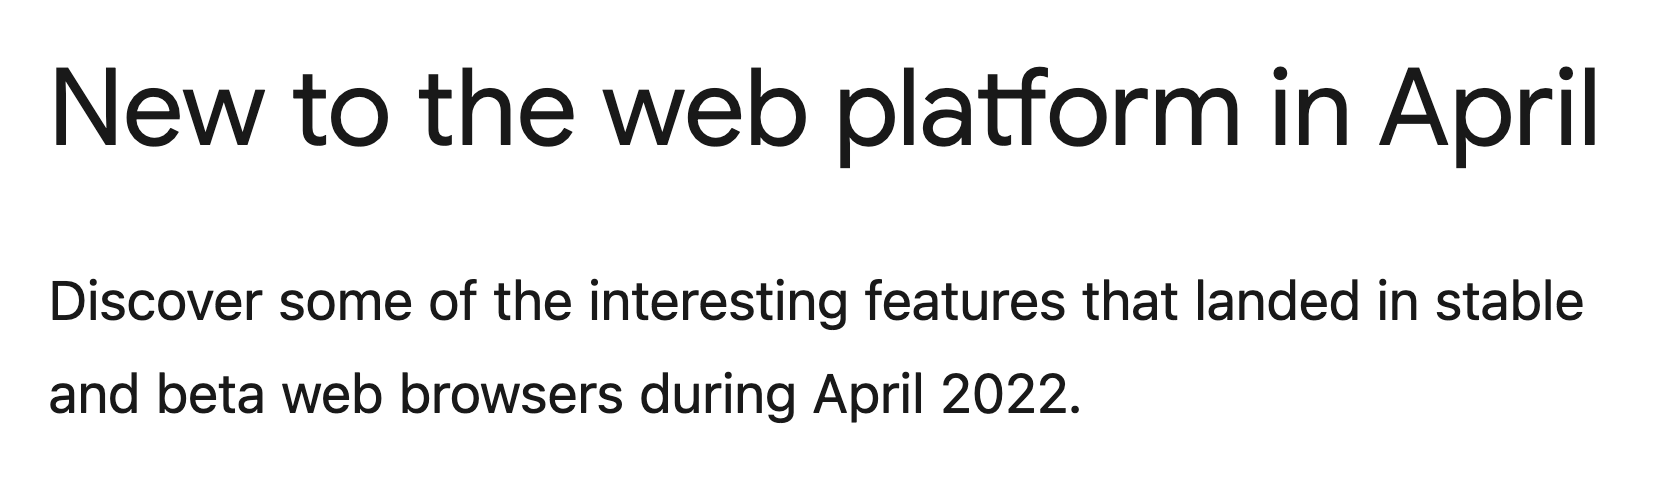 New to the web platform in April – Discover some of the interesting features that landed in stable and beta web browsers during April 2022.